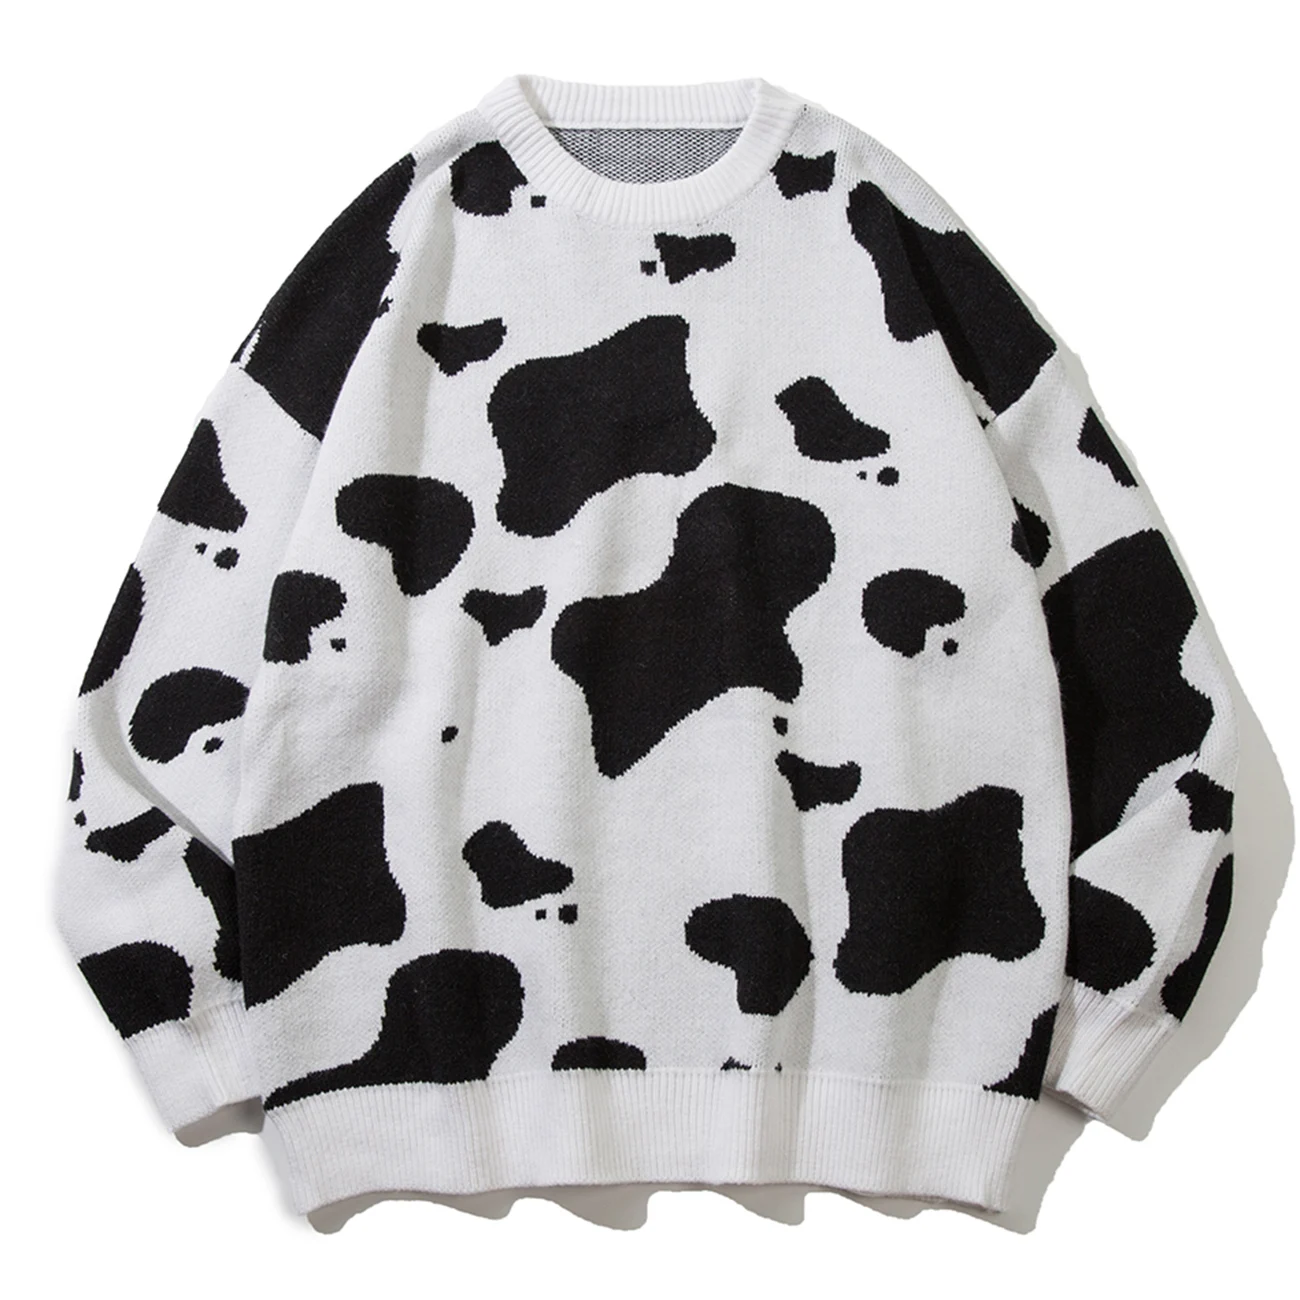 2021 Cow Full Print Knitted Sweater Oversize New Streetwear Clothing Retro Sweater Hip Hop Pullover Men Unisex 2021